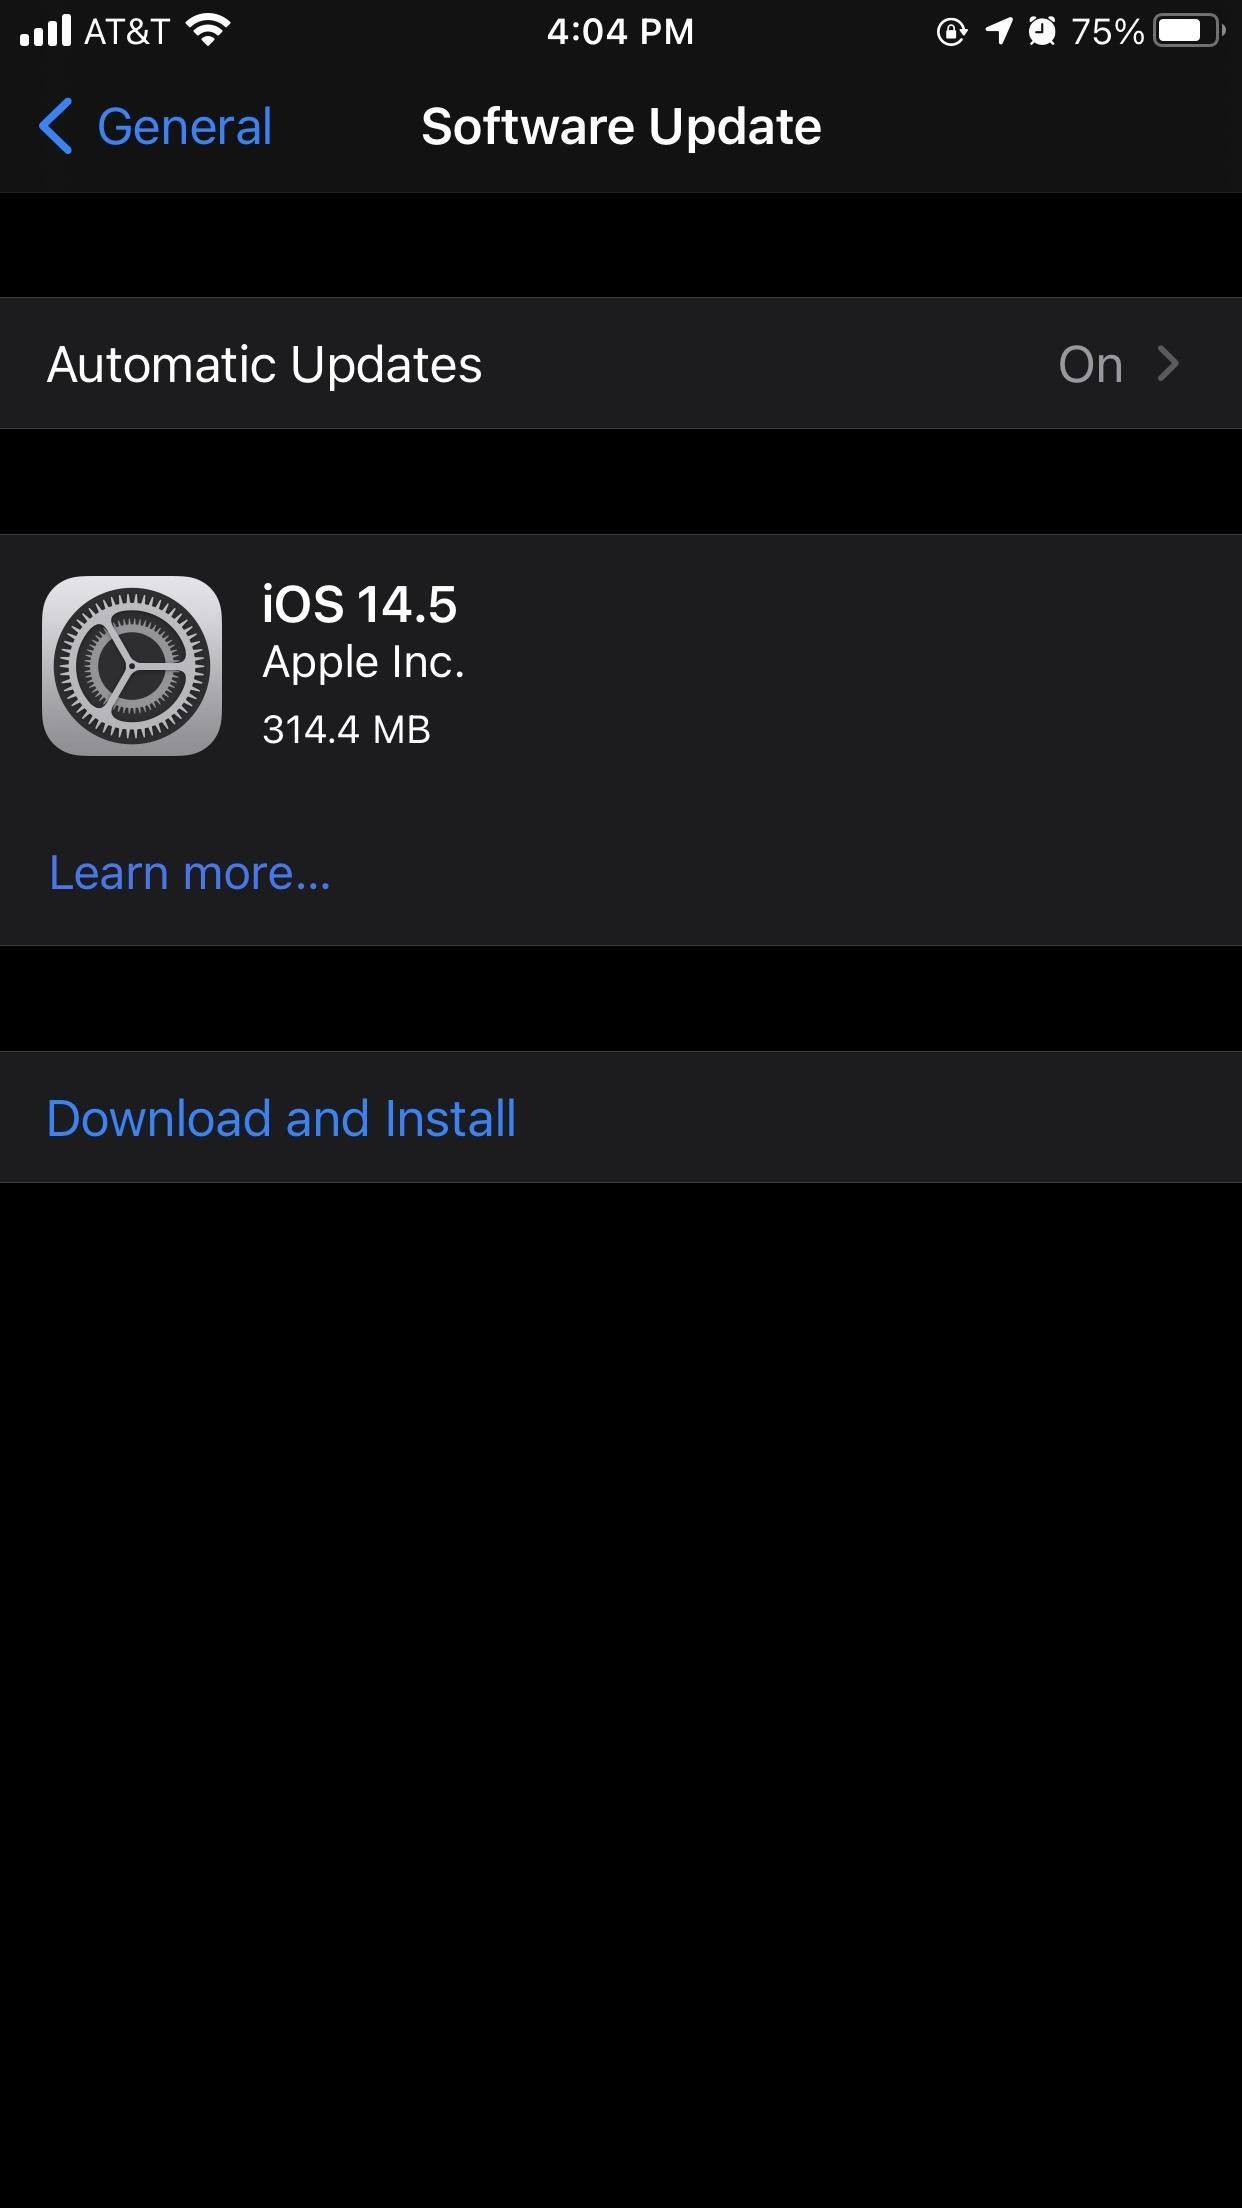 Apple Releases iOS 14.5 Public Beta 4 for iPhone, Features Reference to New 'City Charts' Playlists in Apple Music